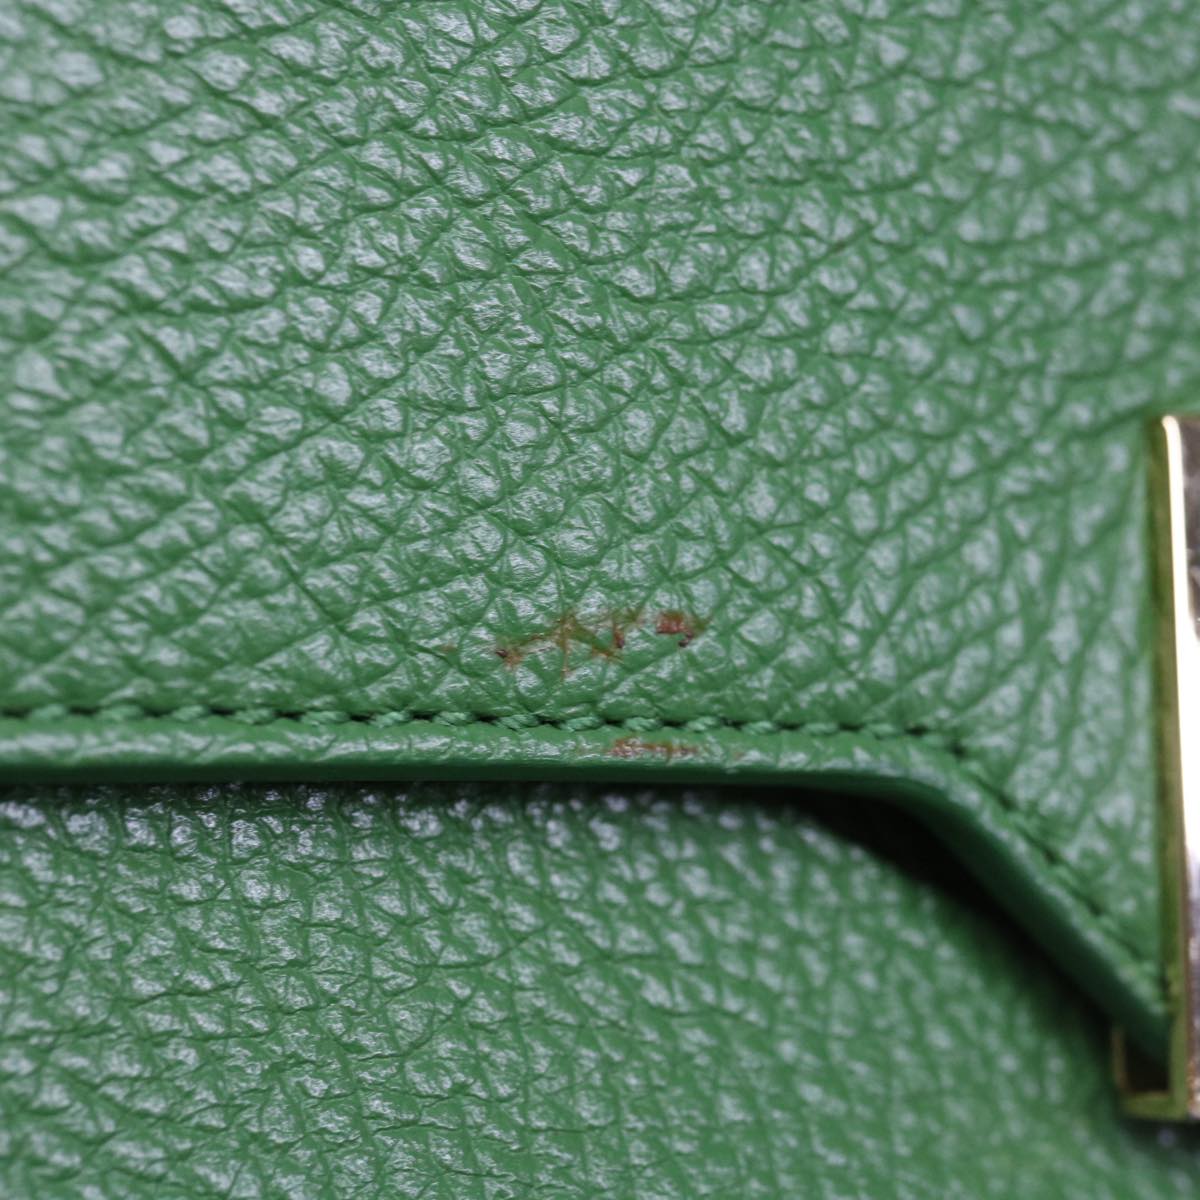 VERSACE Chain Hand Bag Leather Green Auth ac2754